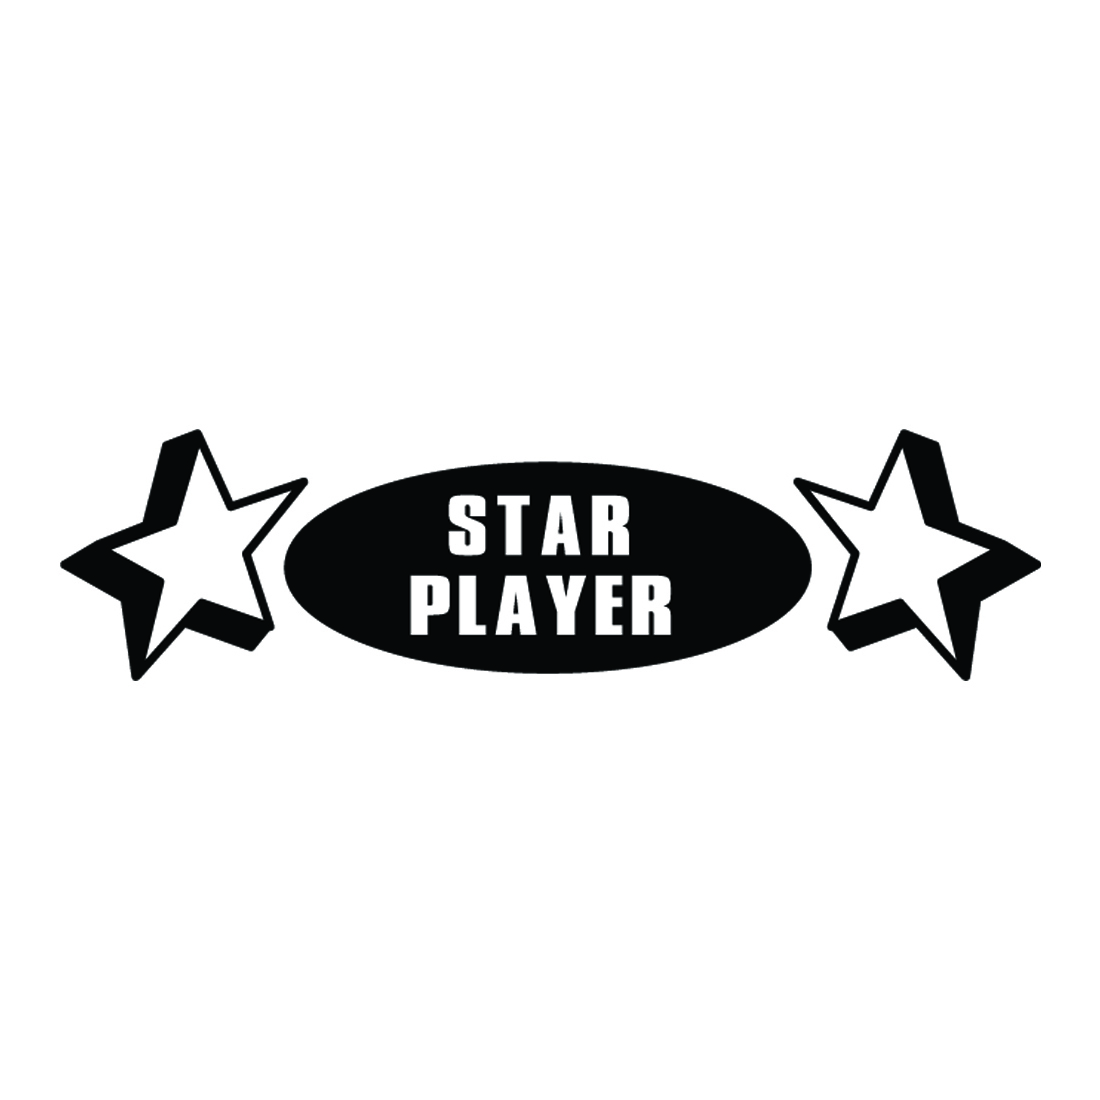 Star Player T Shirt cover image.